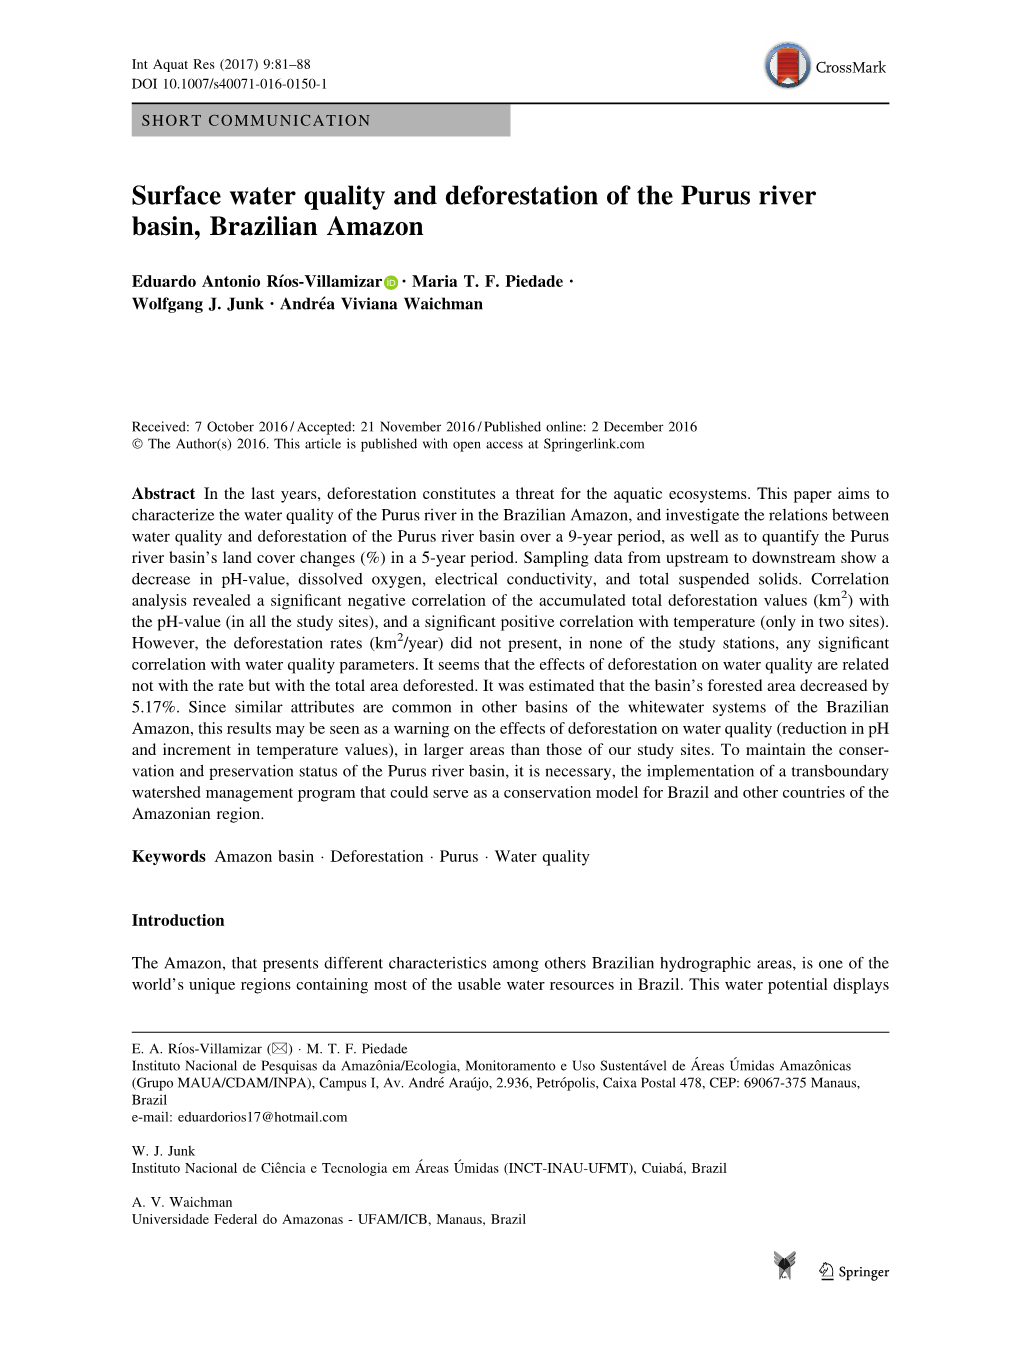 Surface Water Quality and Deforestation of the Purus River Basin, Brazilian Amazon